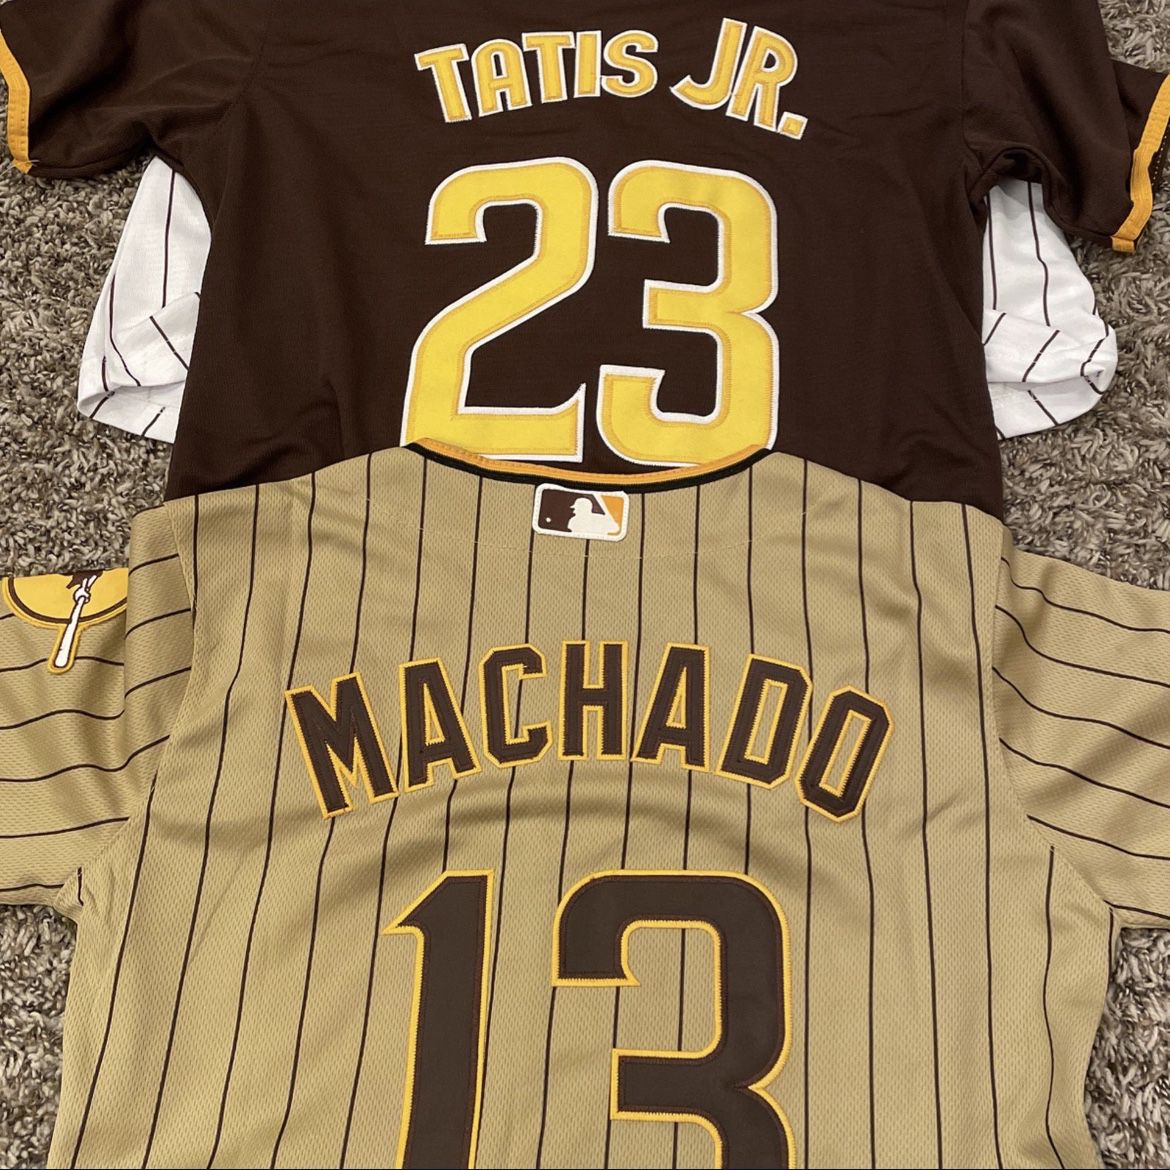 San Diego Padres Kids Jersey Machado Kids Jersey Padres Military Jersey for  Sale in Chula Vista, CA - OfferUp